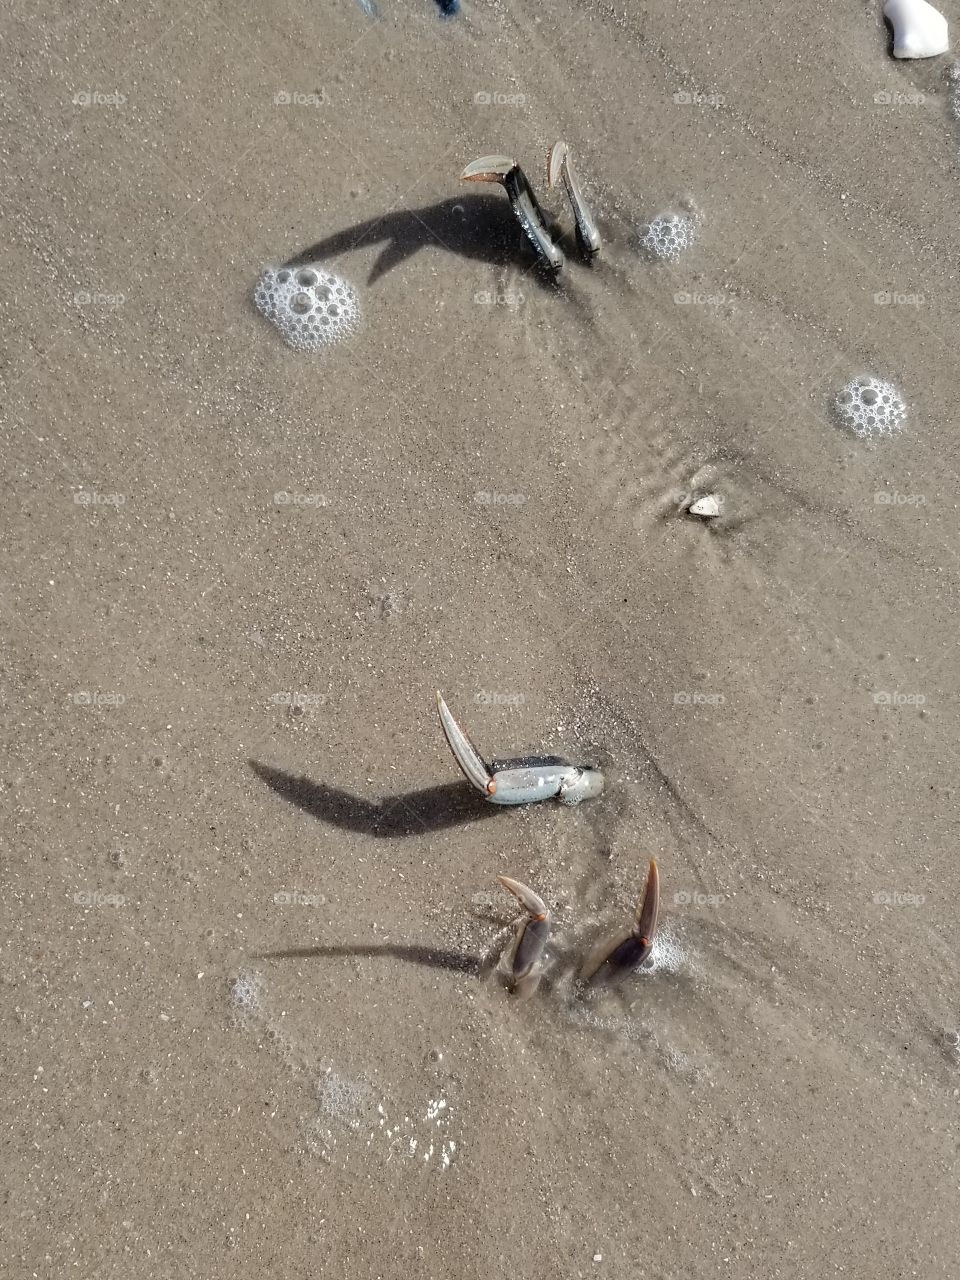 crab in the sand